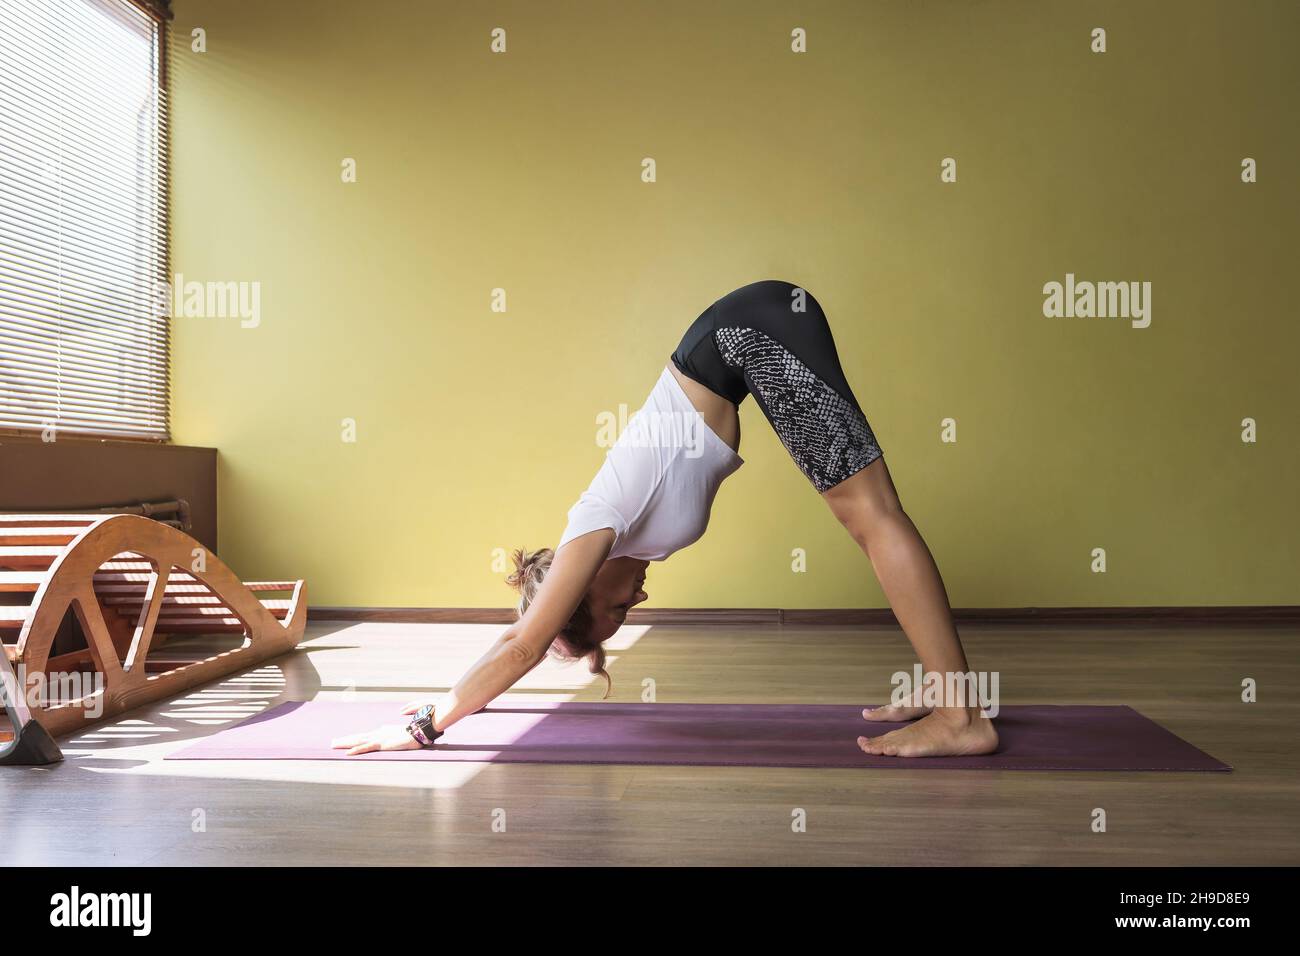 A woman performs the exercise Adho Mukha Svanasana, dog face down pose, exercising in sportswear on a mat in the studio Stock Photo